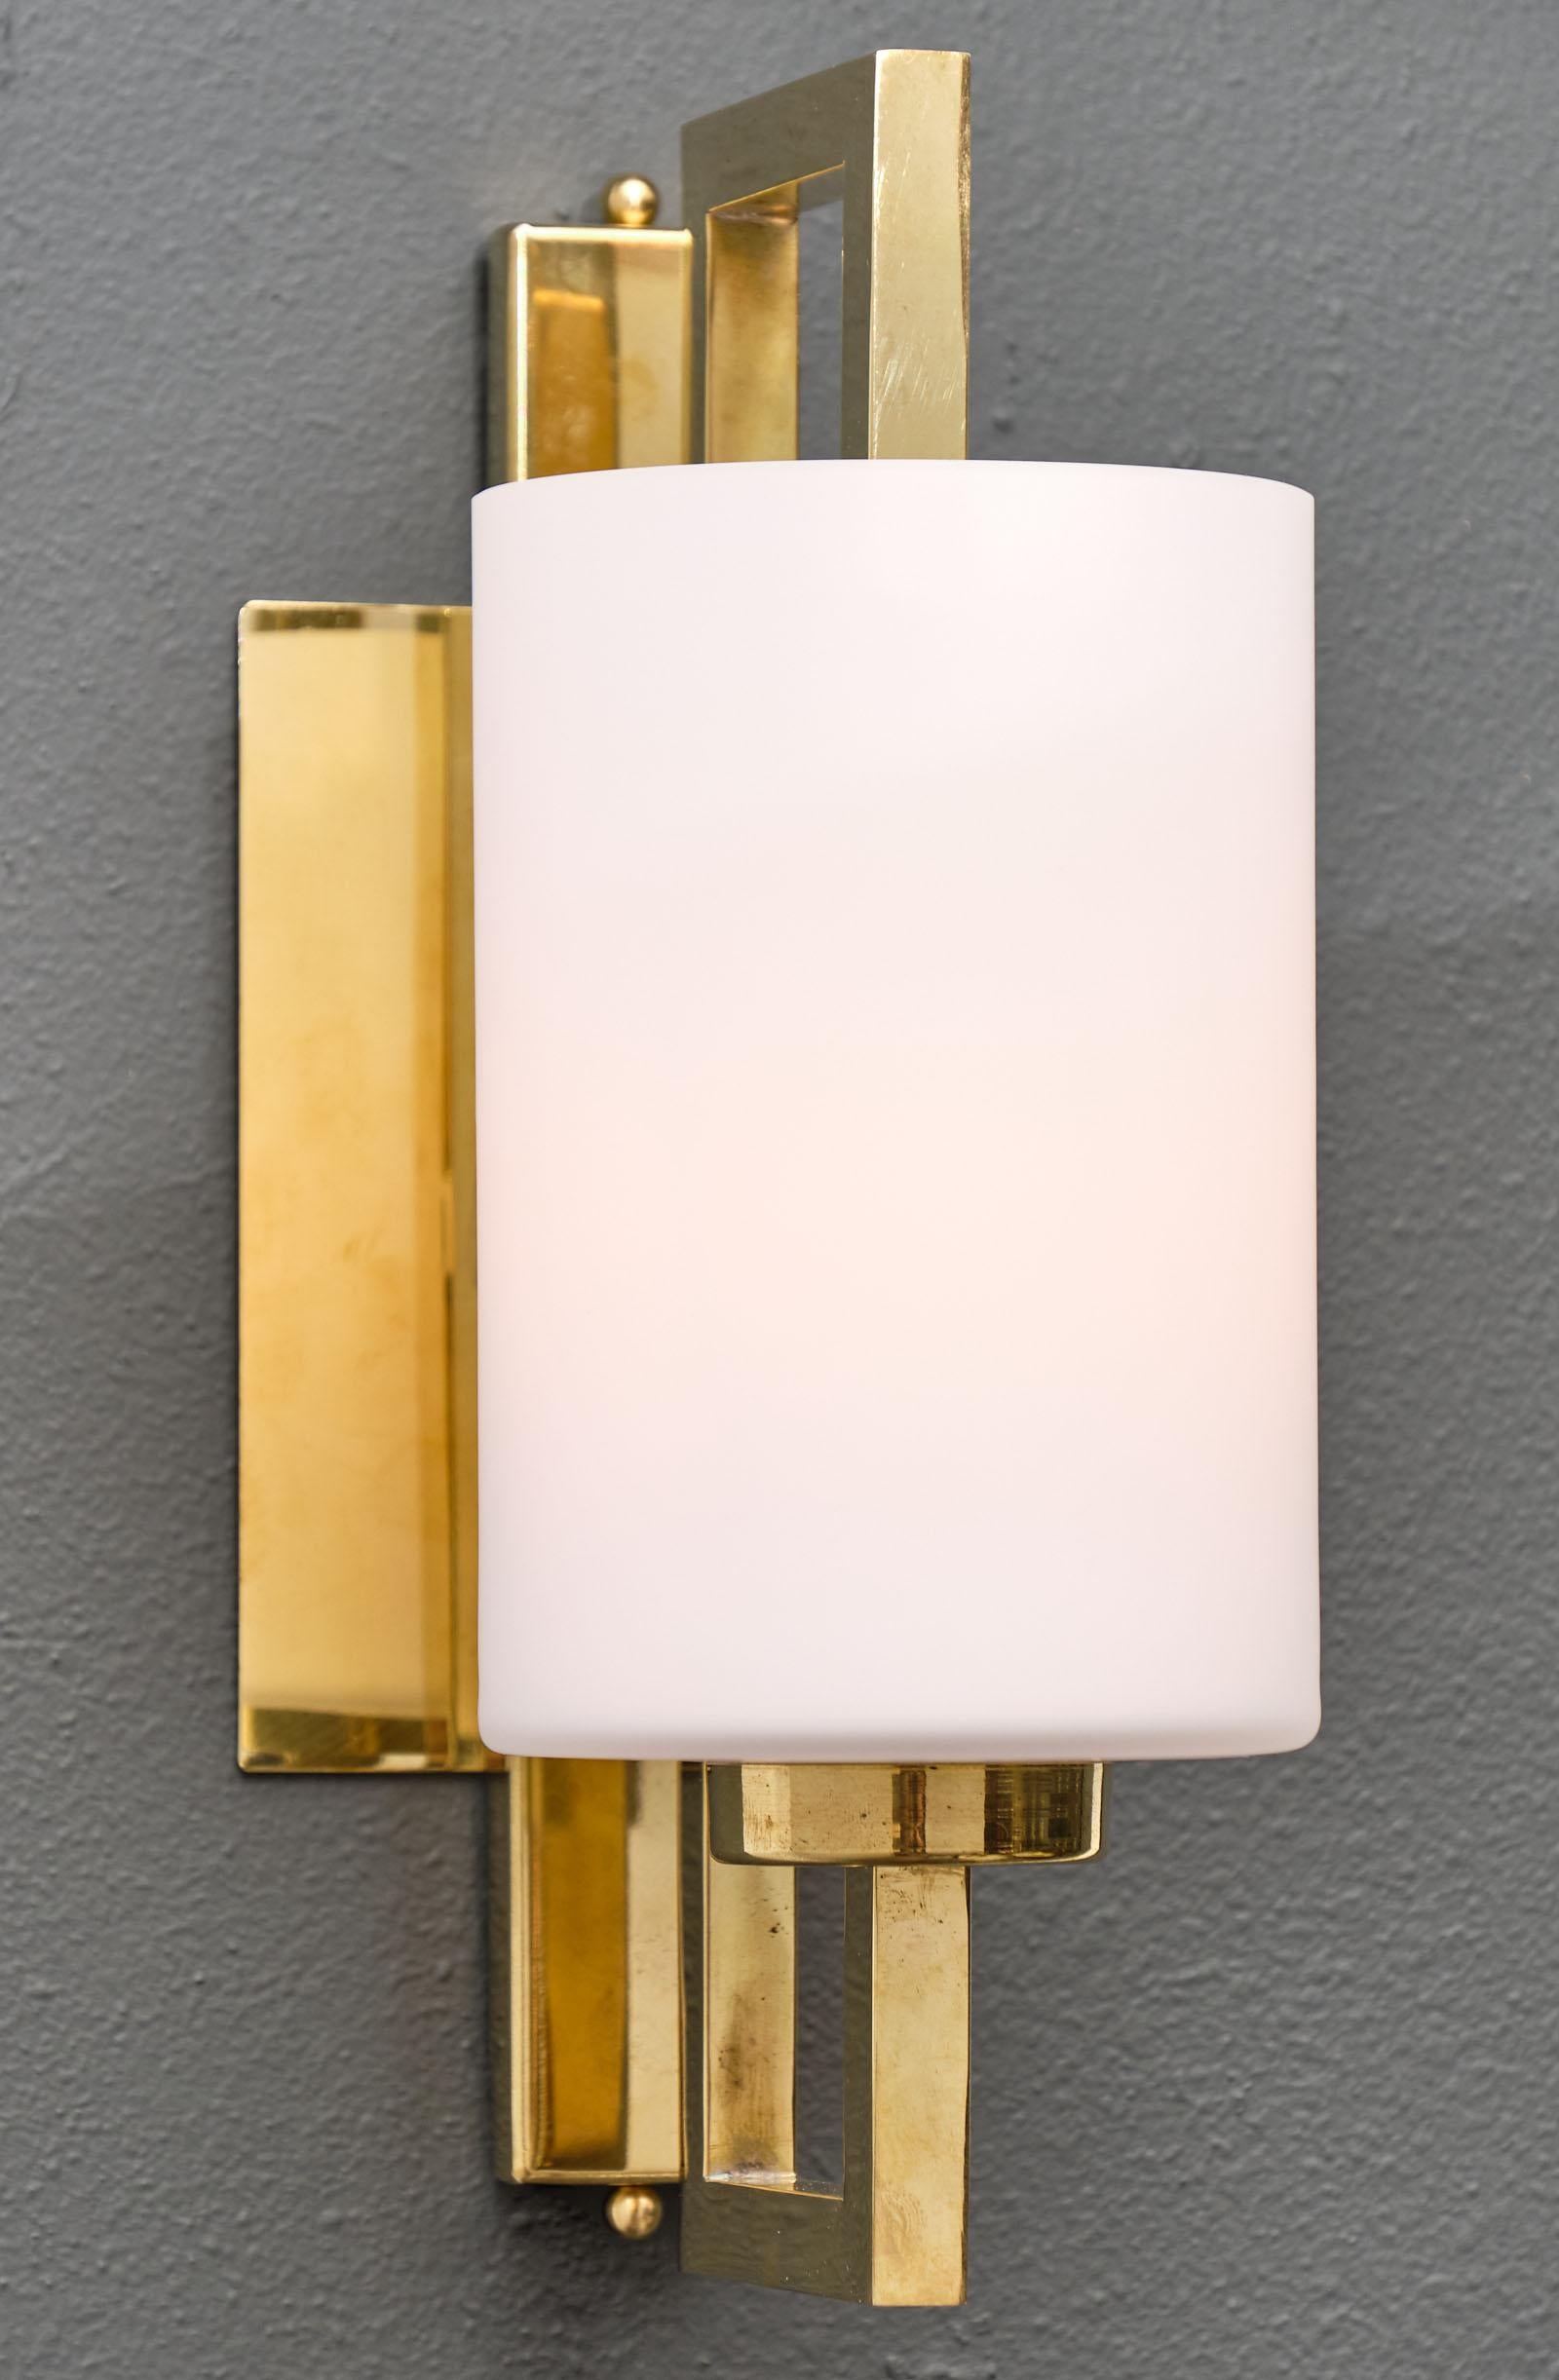 A pair of Murano glass cylindrical sconces featuring a large hand blown frosted cylindrical glass element held in its center by an opened rectangular brass structure. This pair has been newly rewired to US standard.

This pair is a special order